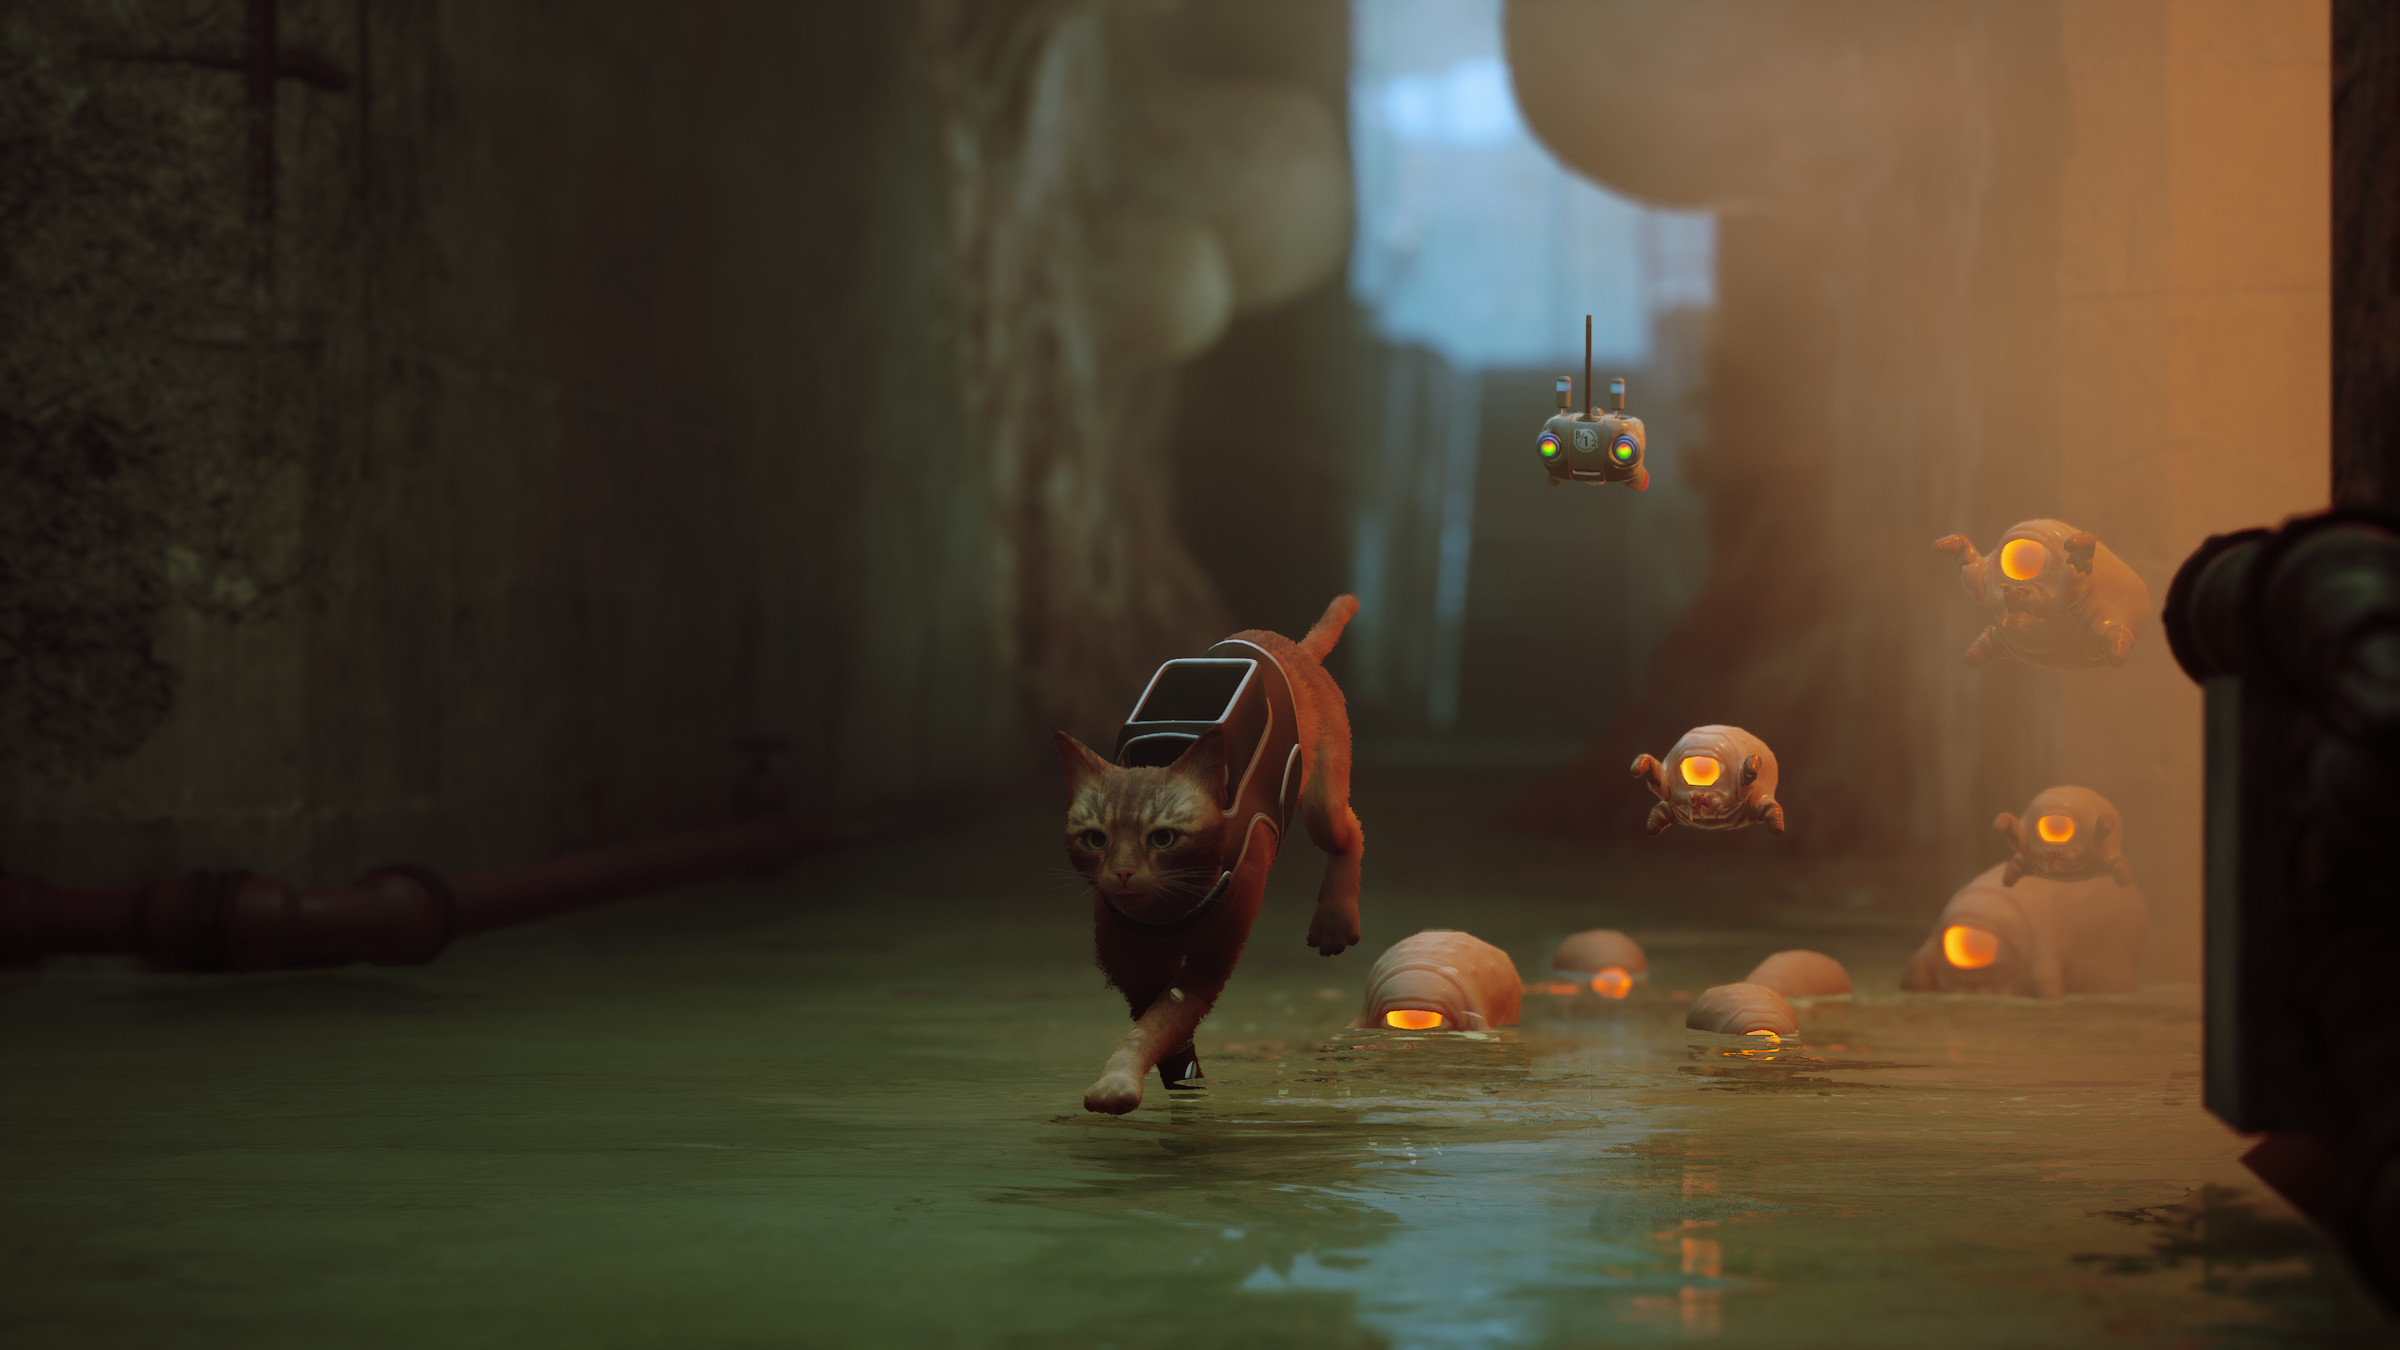 In the game Tramp, a cat runs from one-eyed aliens in a watery cave.